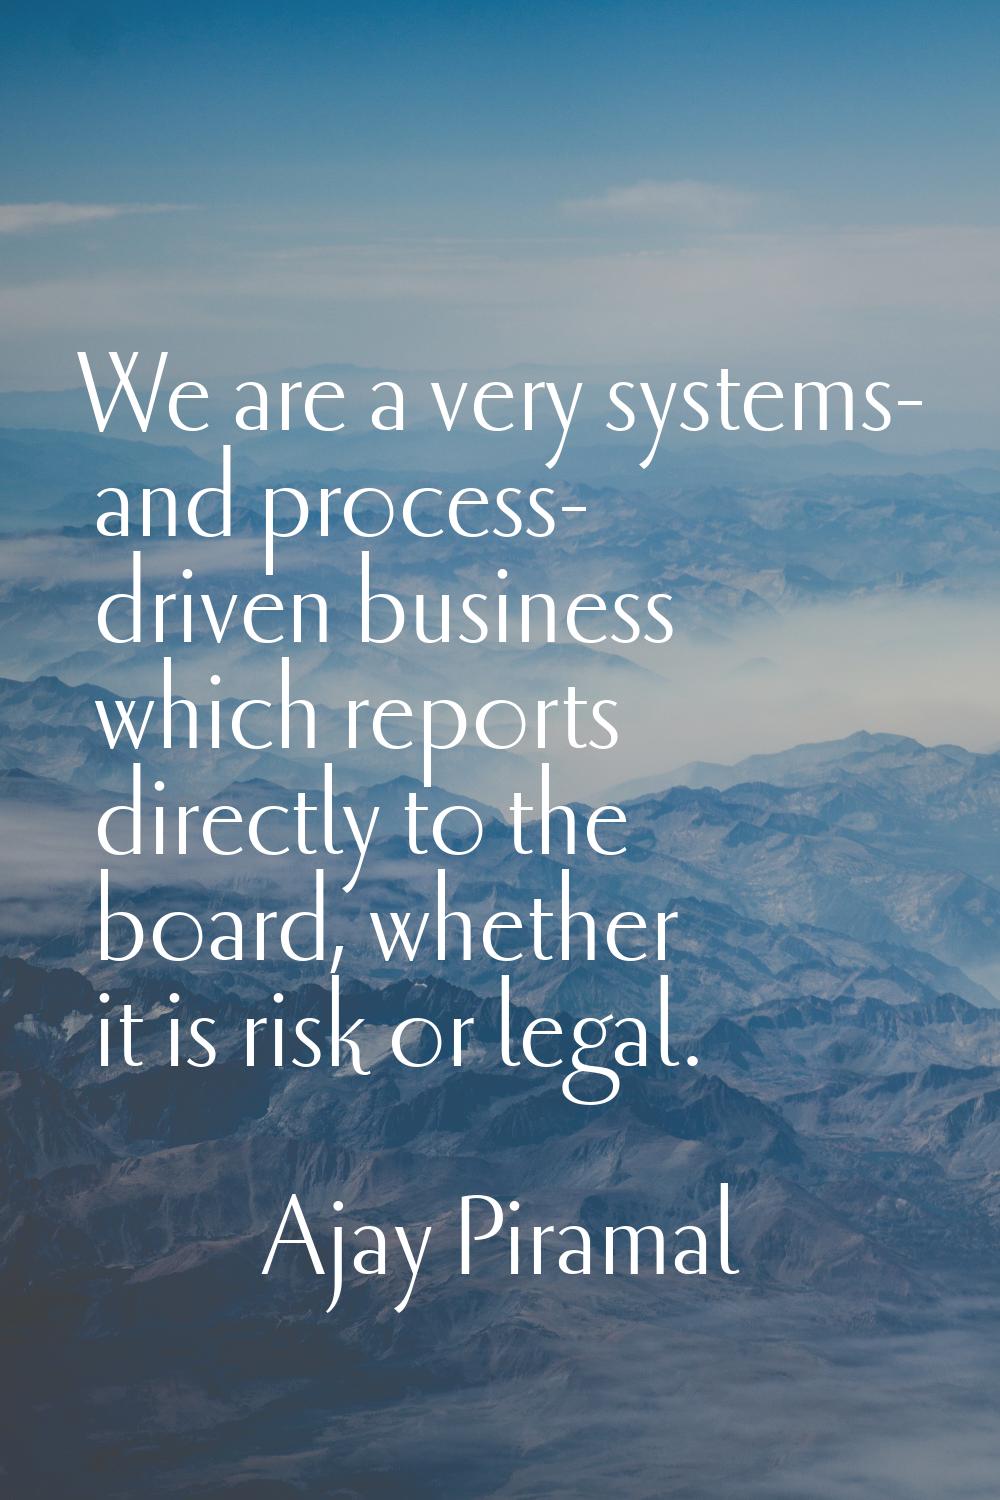 We are a very systems- and process- driven business which reports directly to the board, whether it